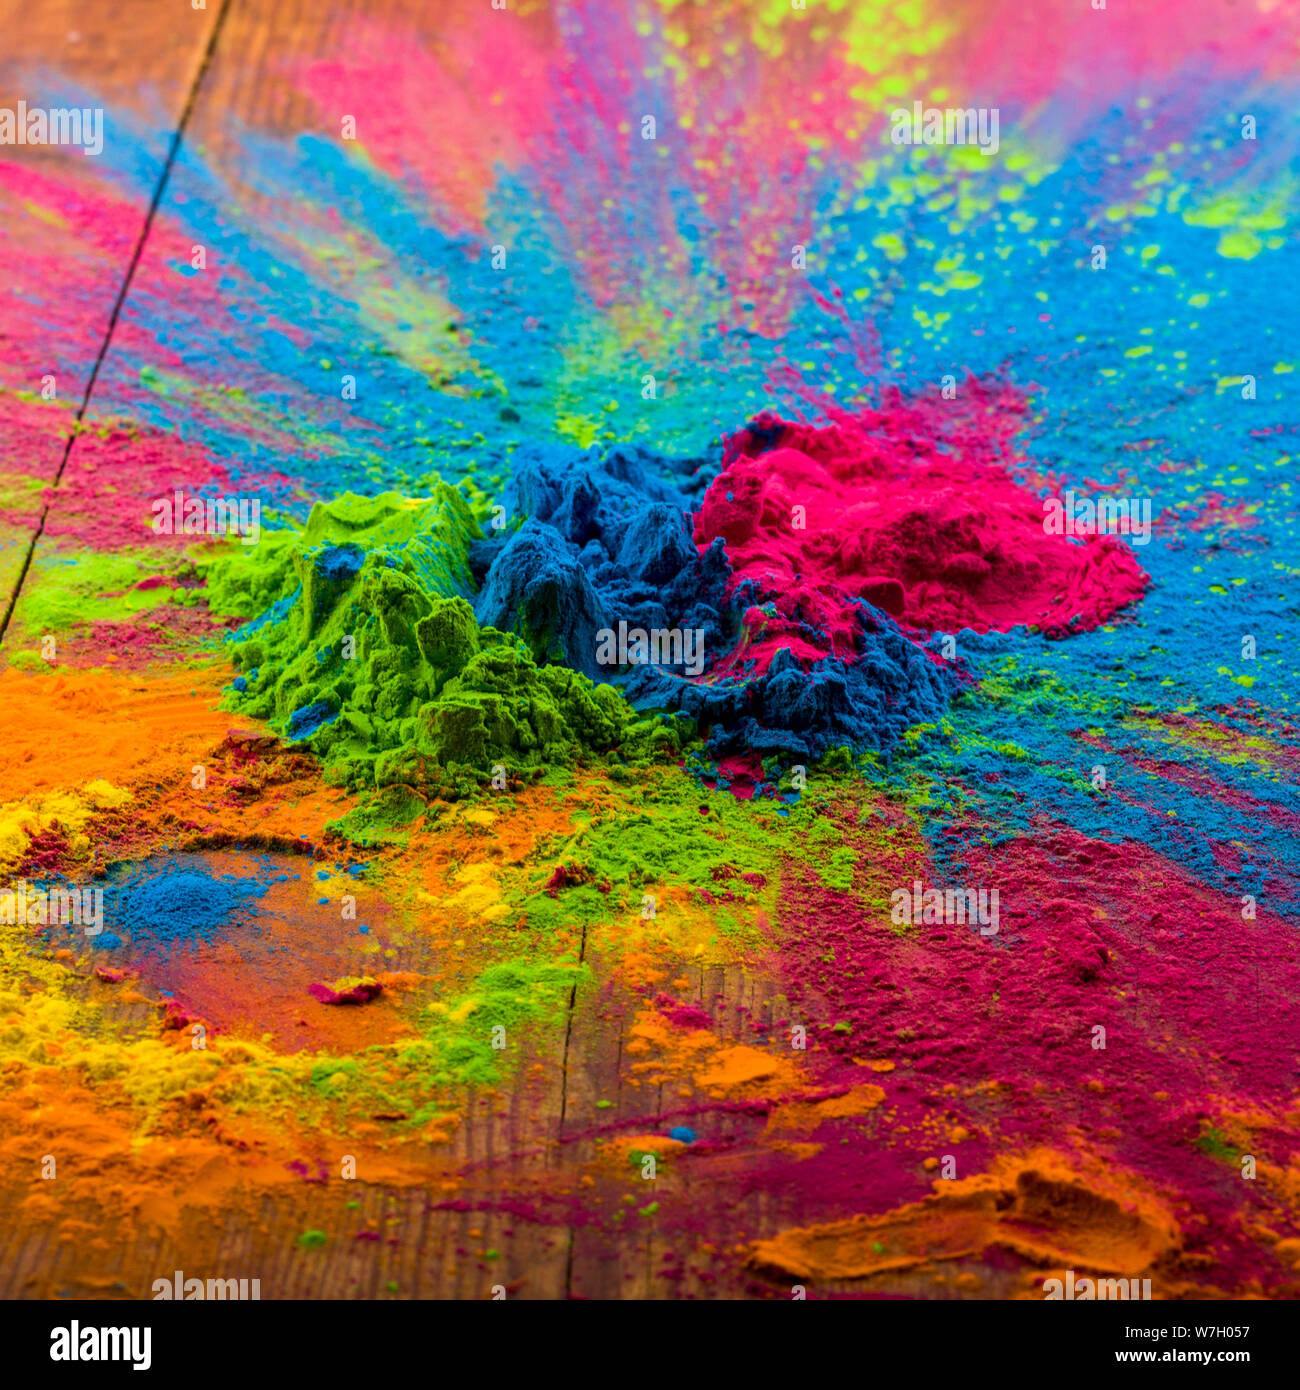 Abstract colorful Happy Holi background. Color vibrant powder on wood. Dust colored splash texture. Flat lay holi paint decoration. Stock Photo